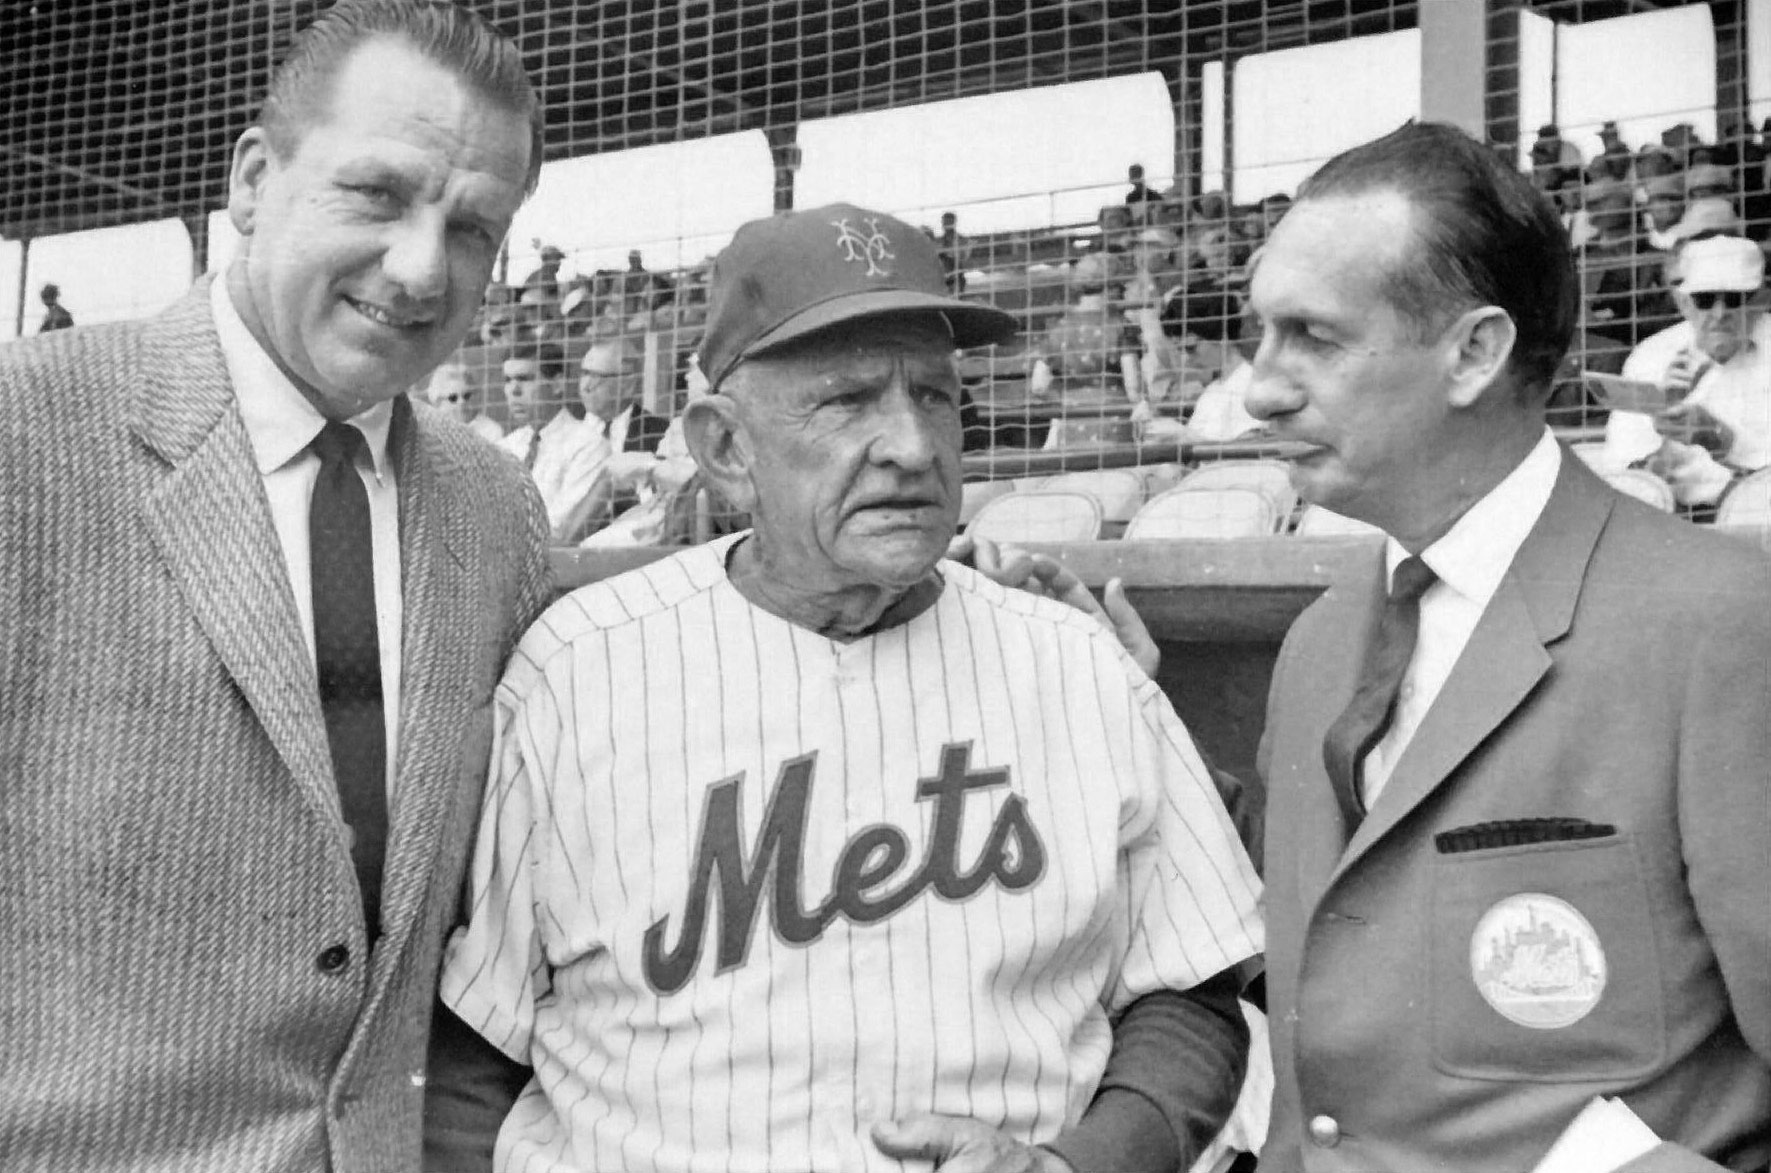 Ralph Kiner, Casey Stengel, and Lindsey Nelson at the New York Mets.